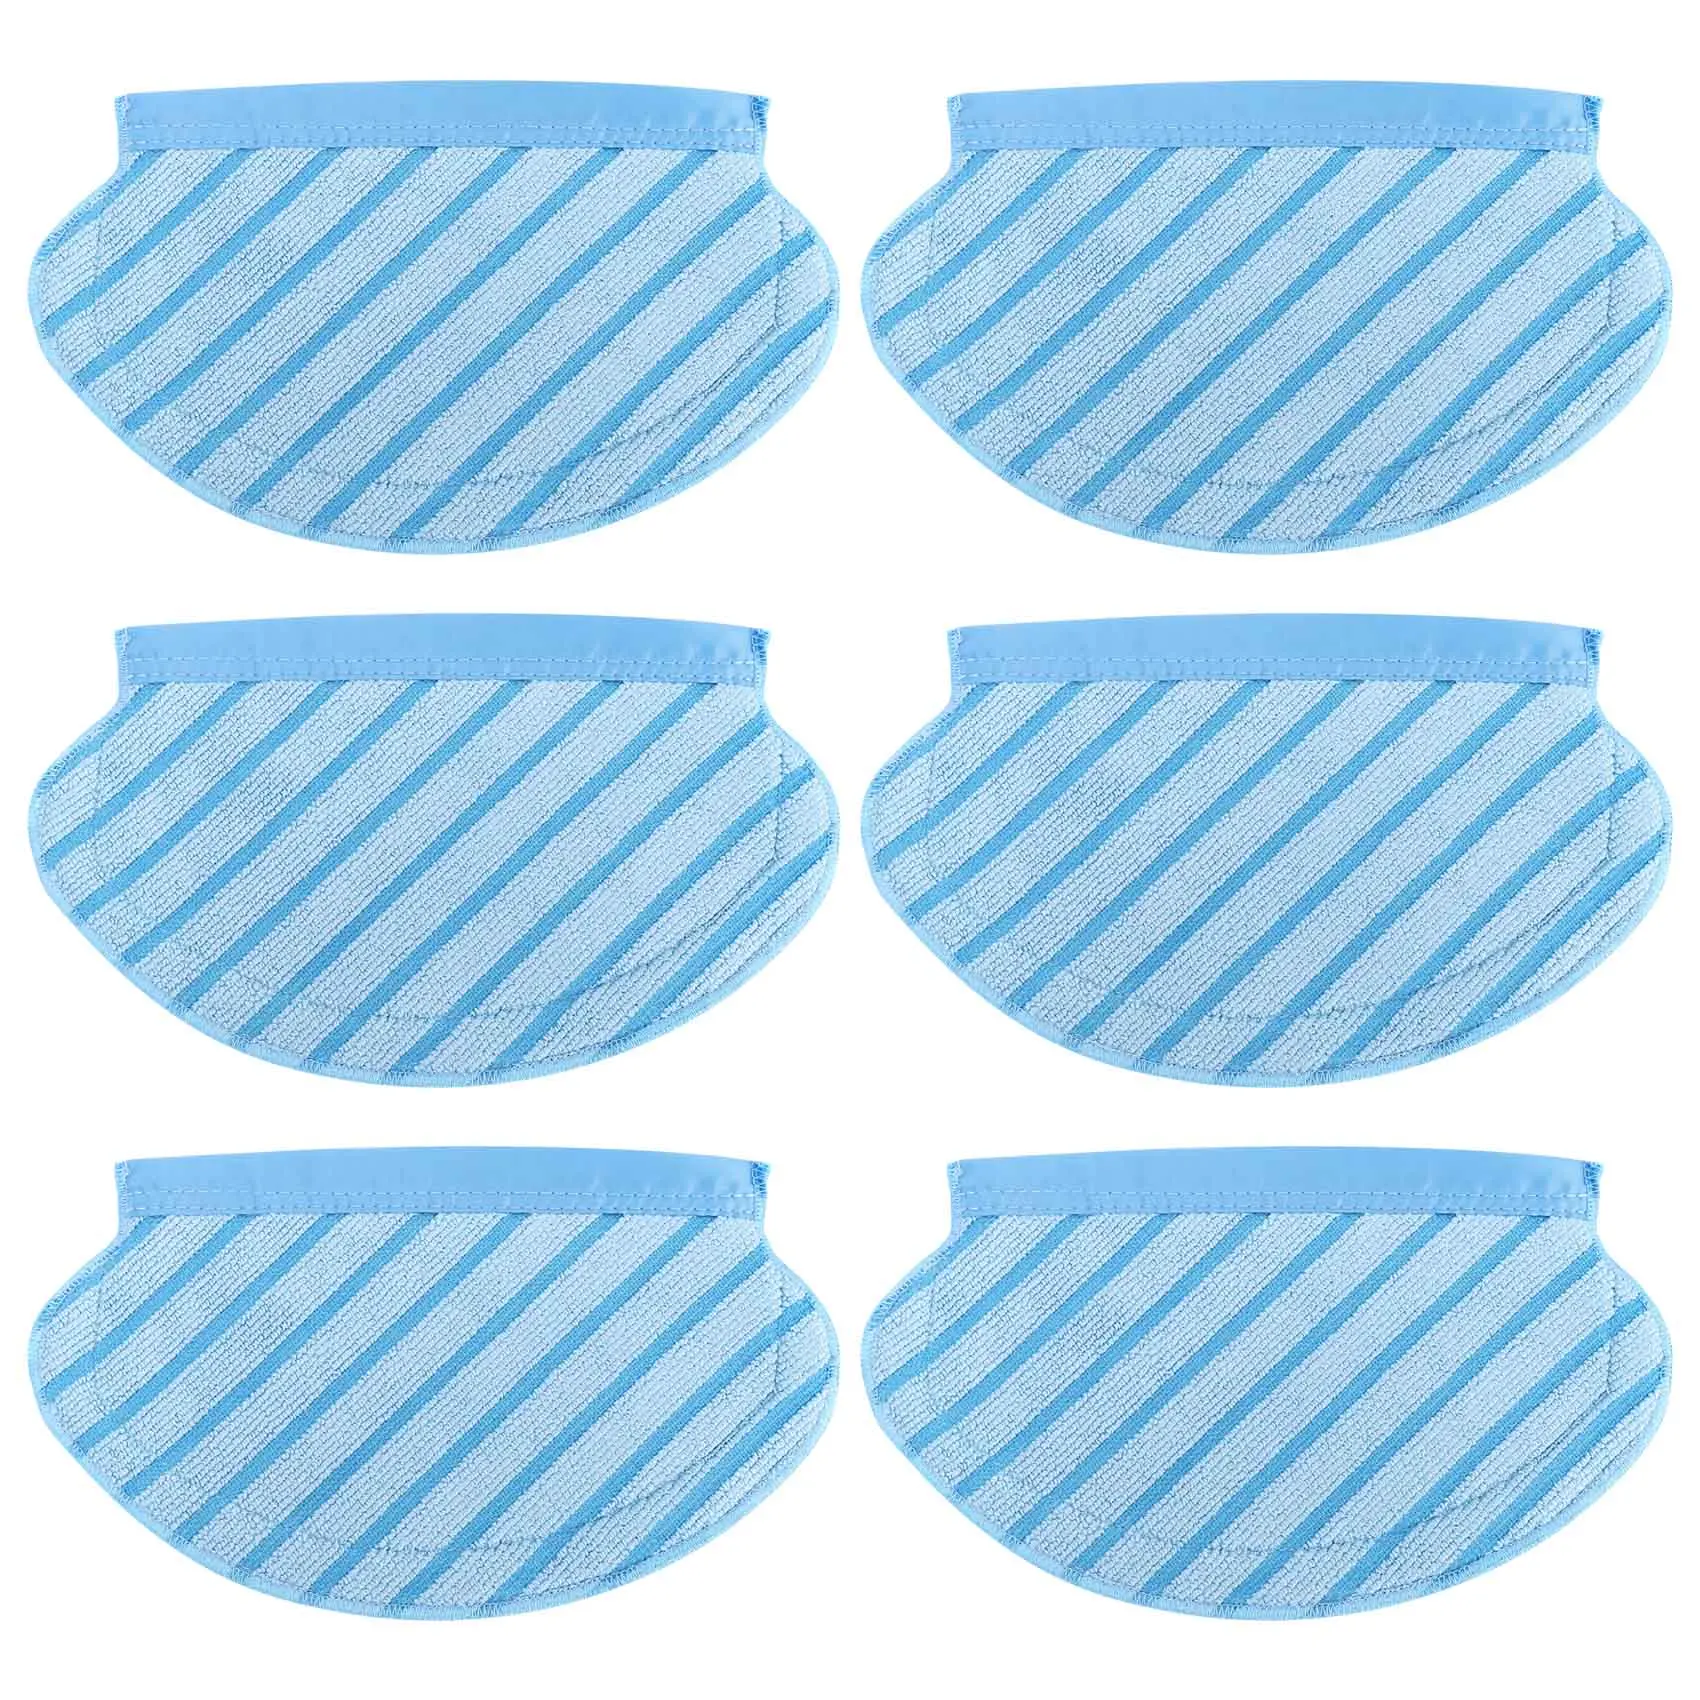 

6Pcs Mop Cloth Pads Set for Ecovacs Deebot Ozmo 920 950 Vacuum Cleaner Parts Replacement Home Accessories